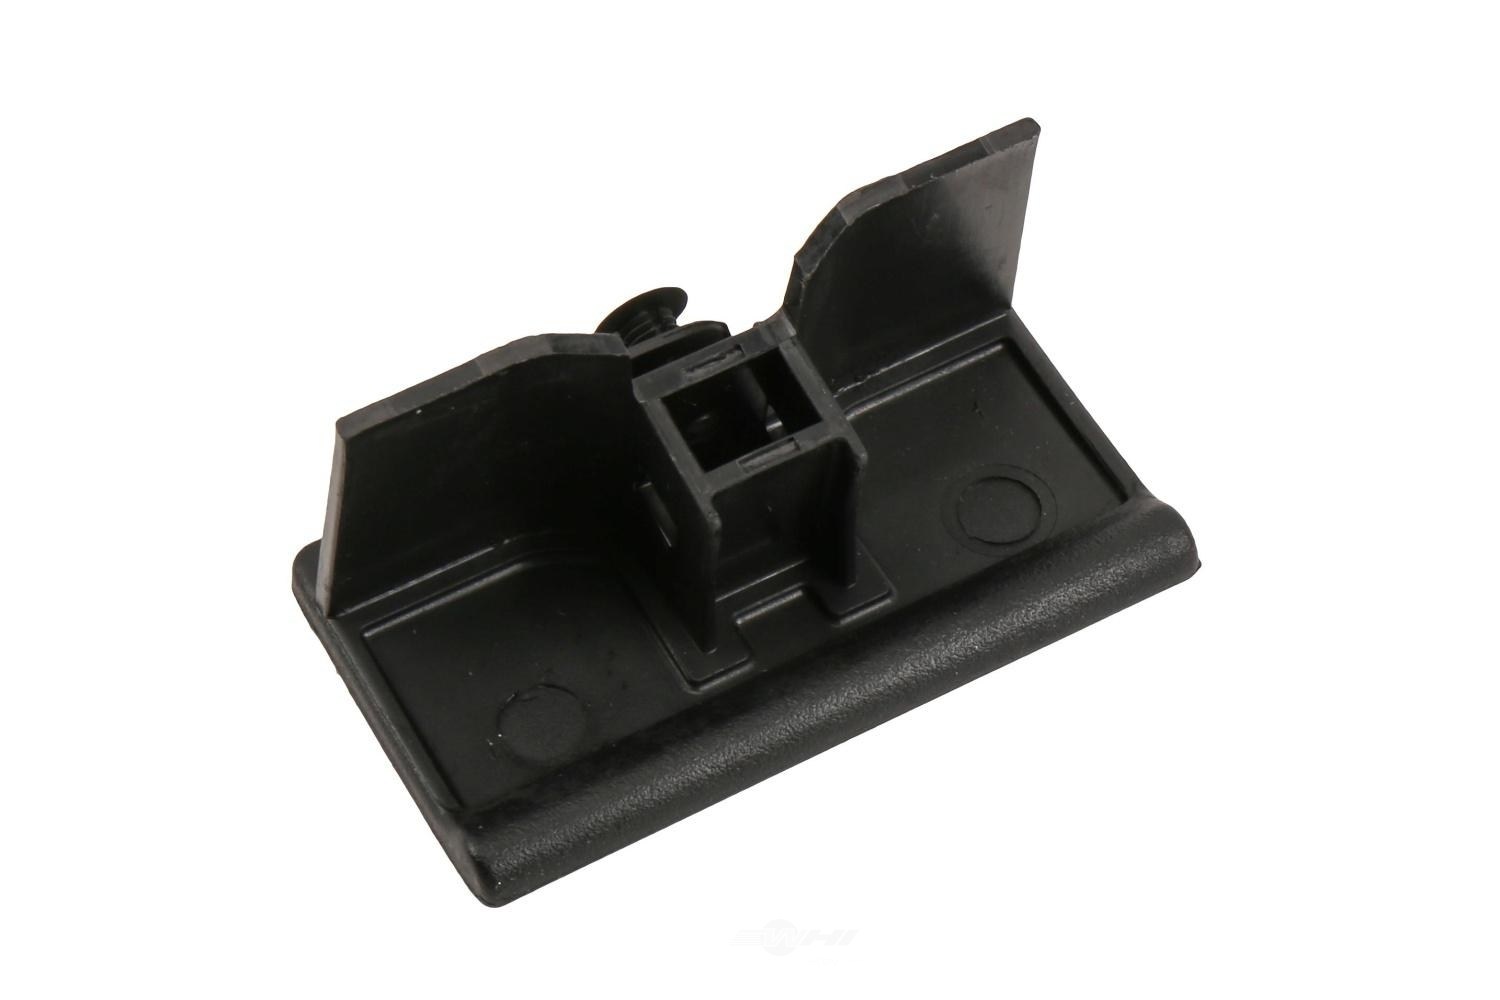 GM GENUINE PARTS - Parking Brake Pedal Release Handle - GMP 20843963